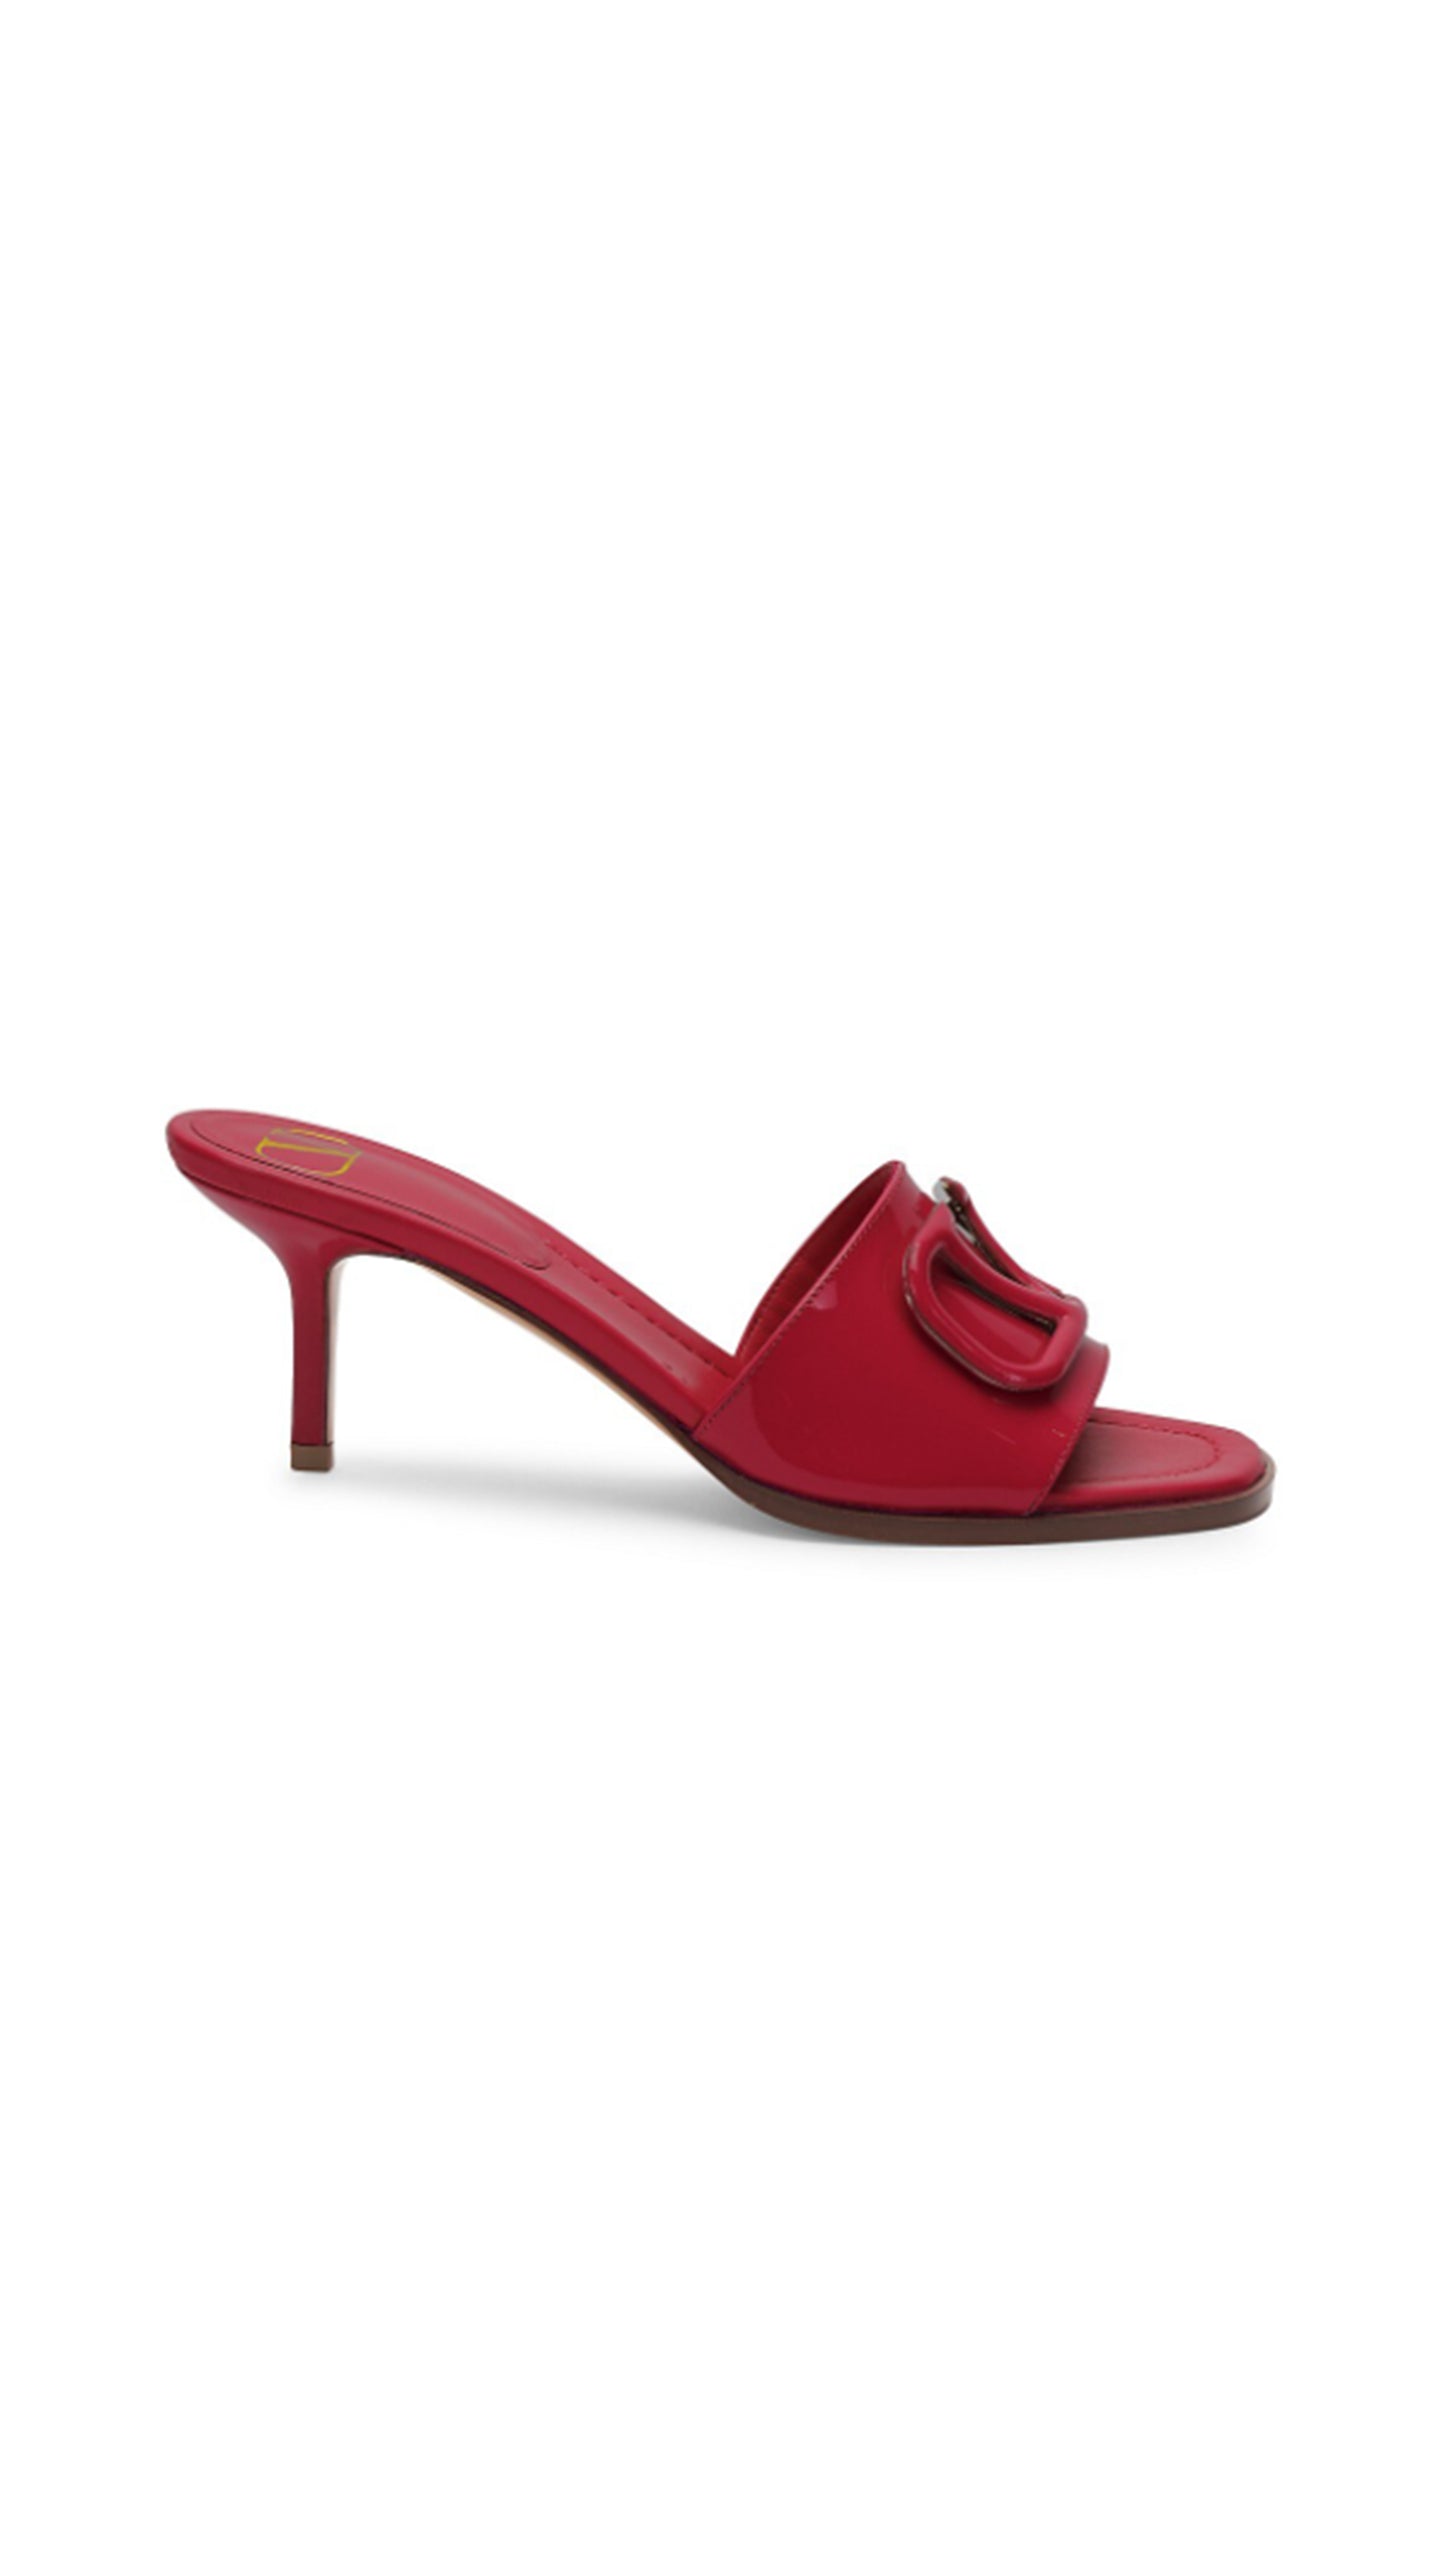 VLogo Patent Leather Sandals - Red